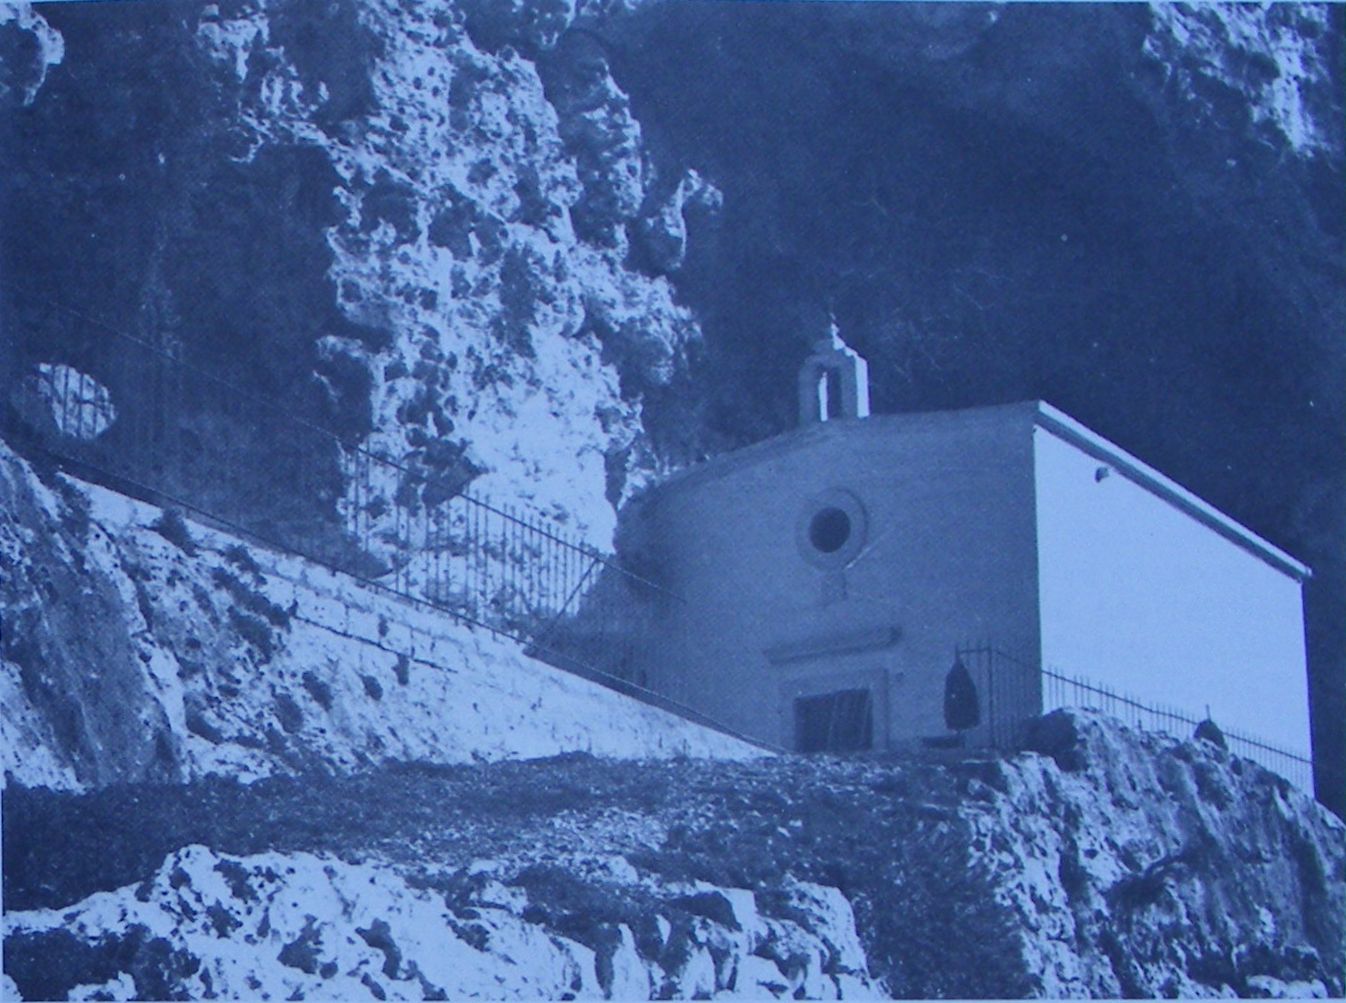 Church of St. Paul the Hermit from across the valley